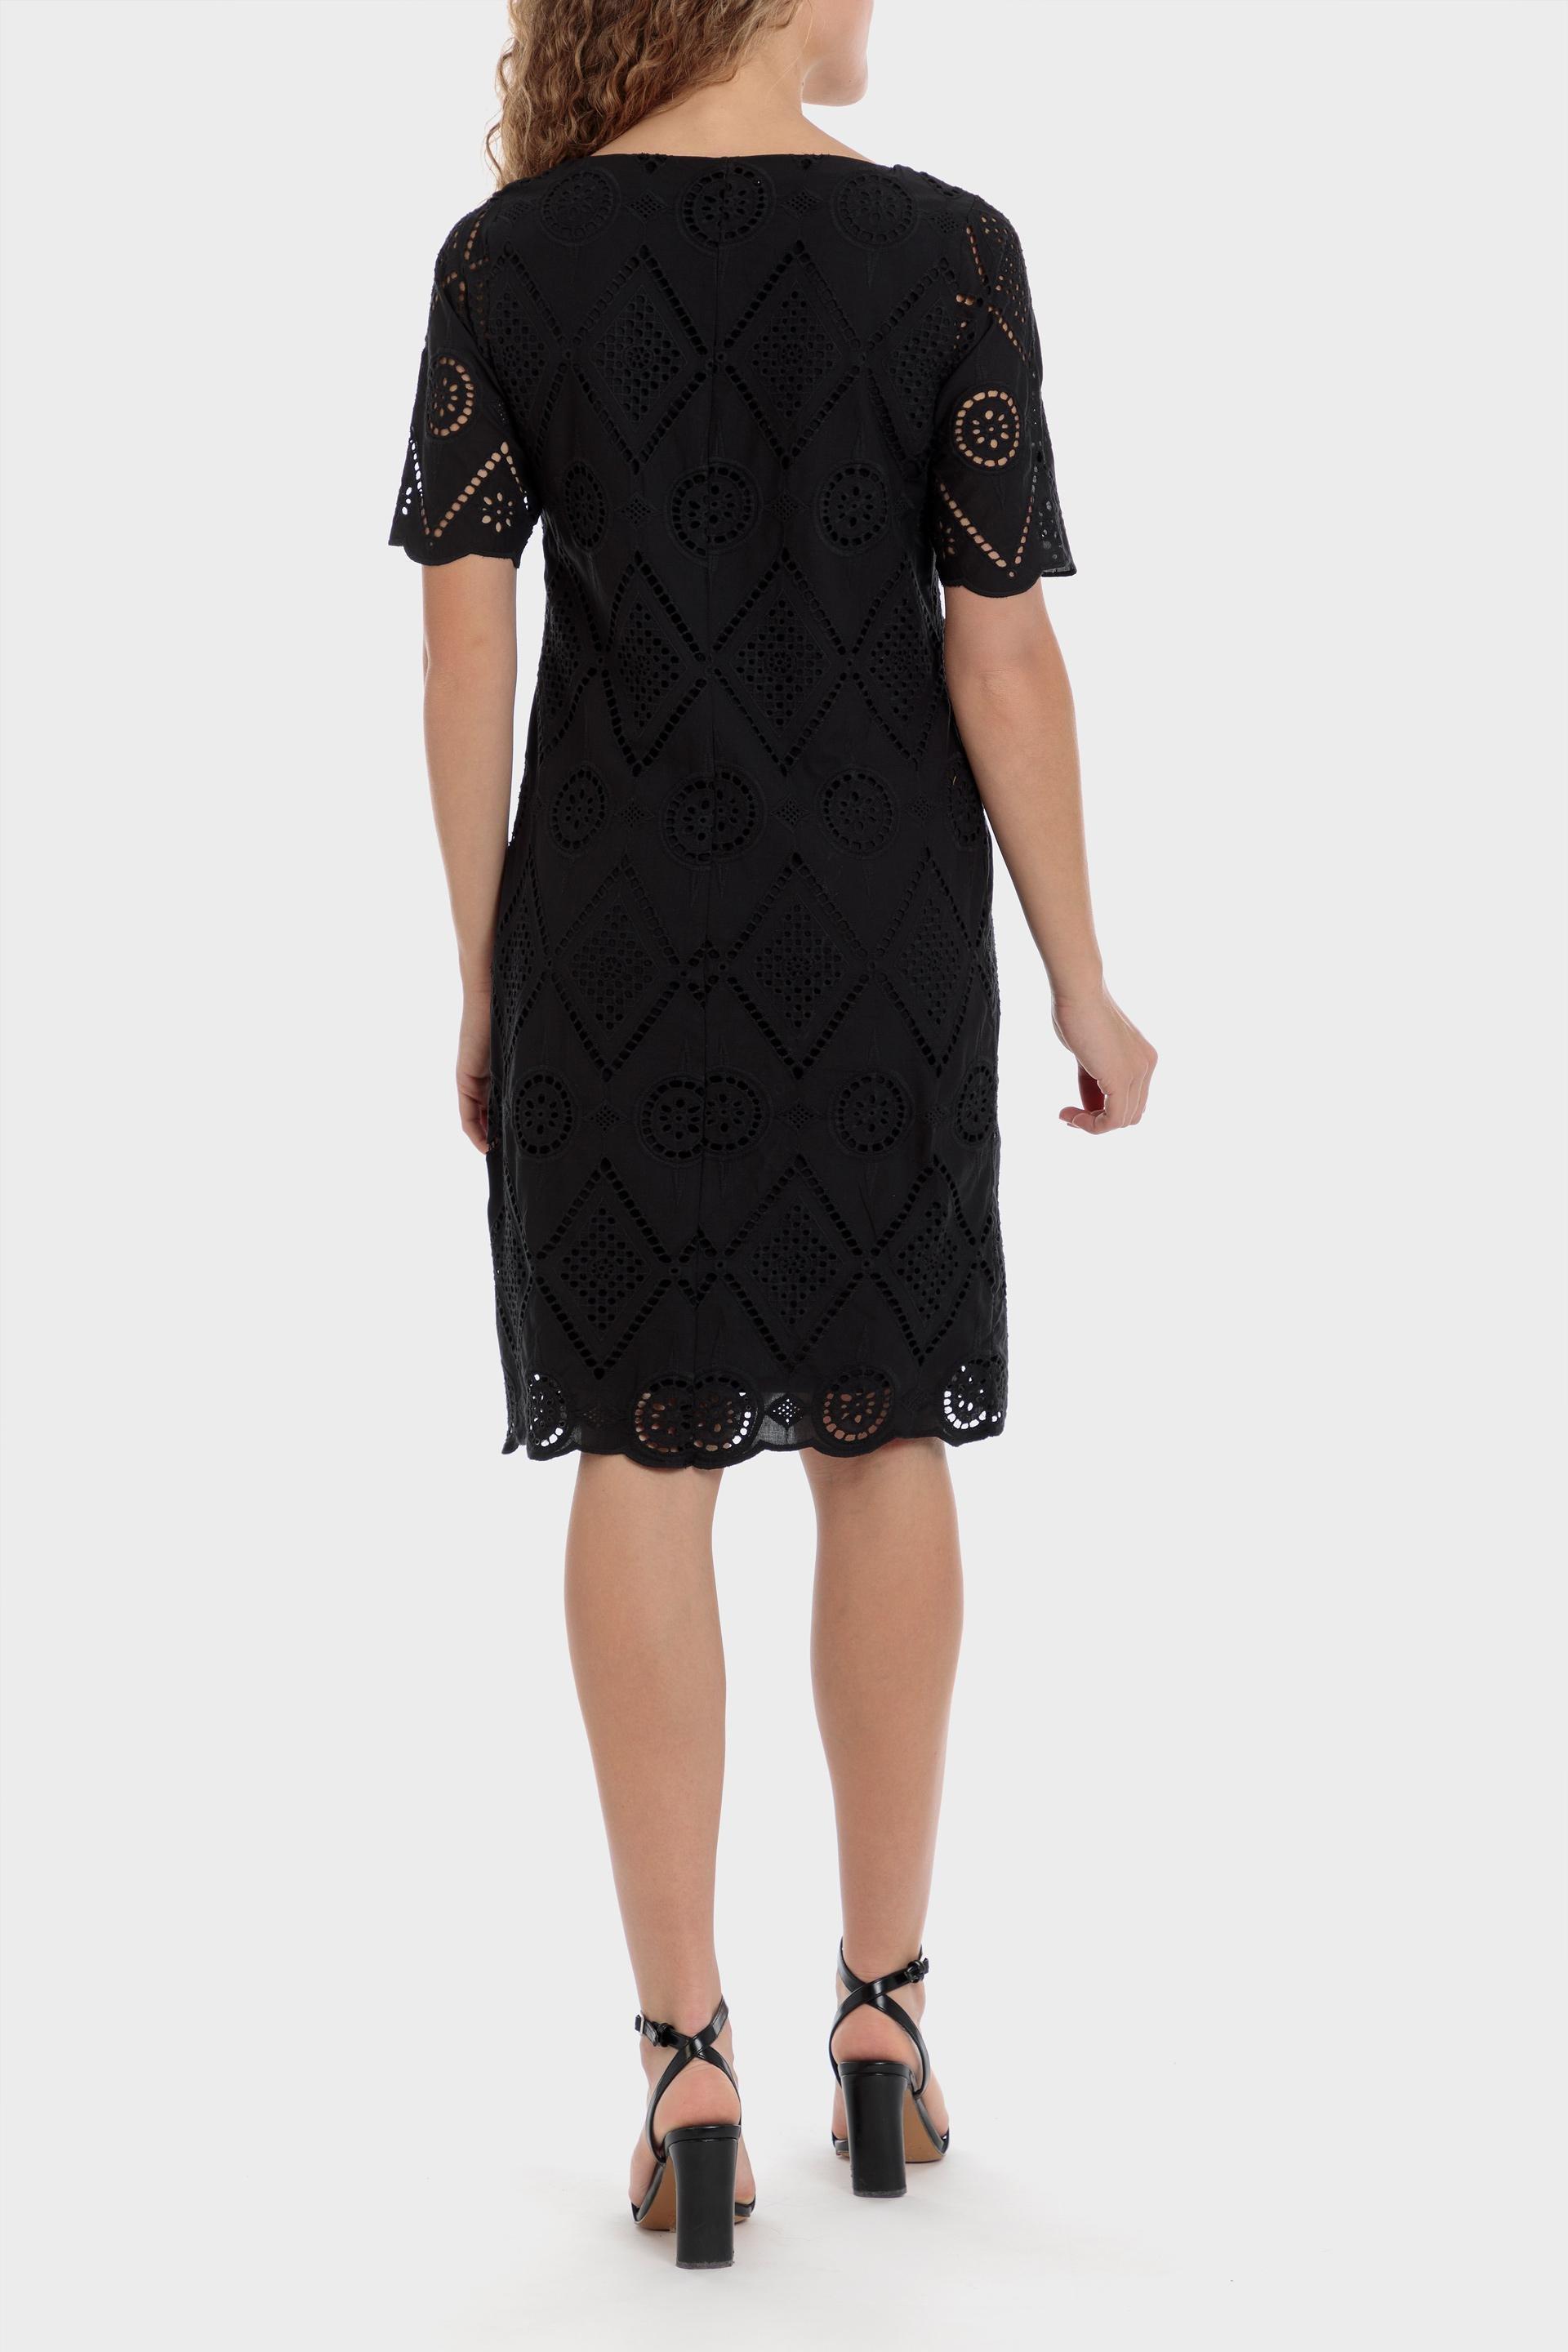 Punt Roma - Black Embroidered Dress